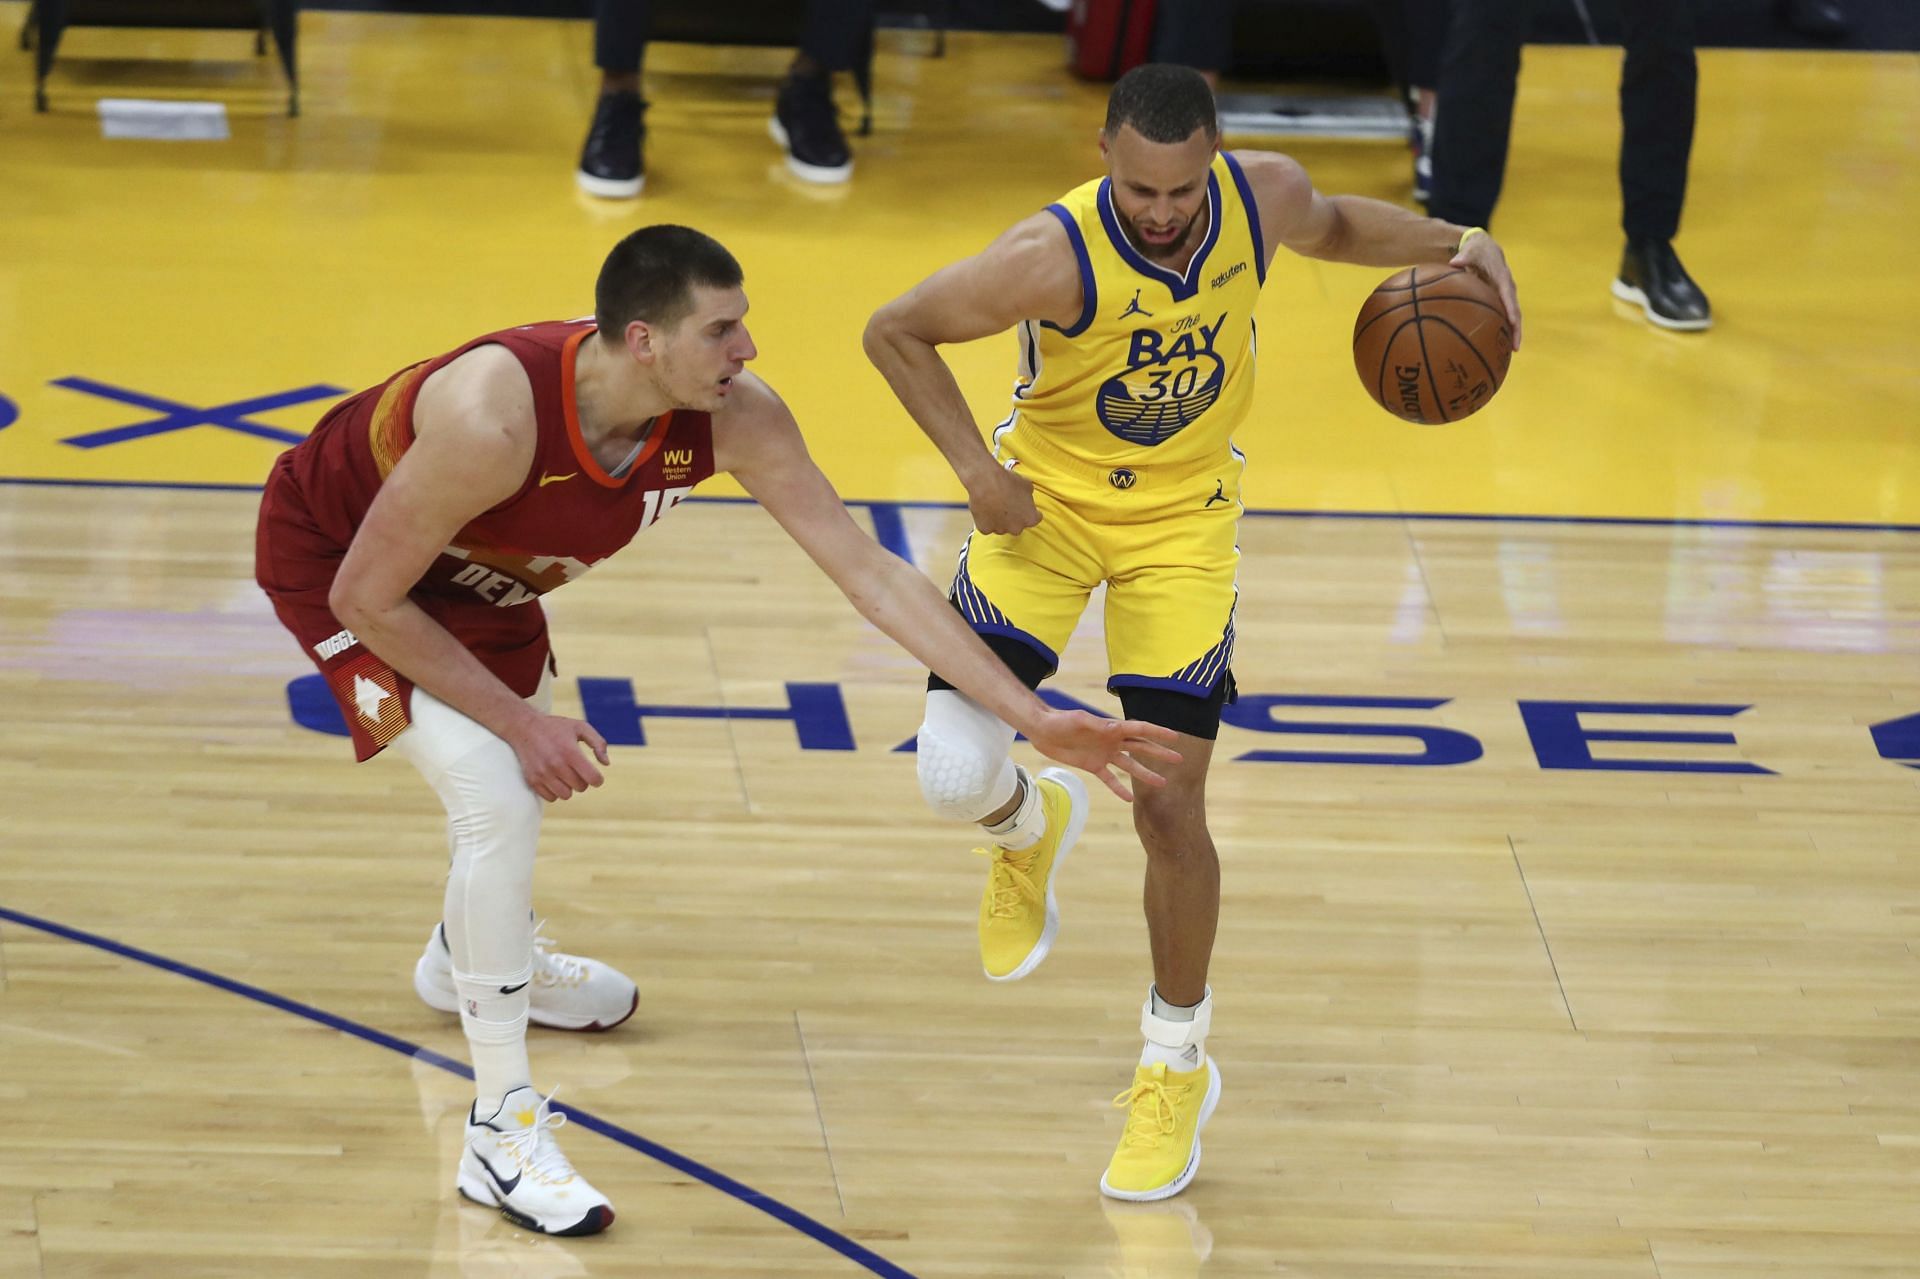 The heavily-shorthanded Golden State Warriors will take on the Denver Nuggets in a make up game on Monday. [Photo: The Denver Post]